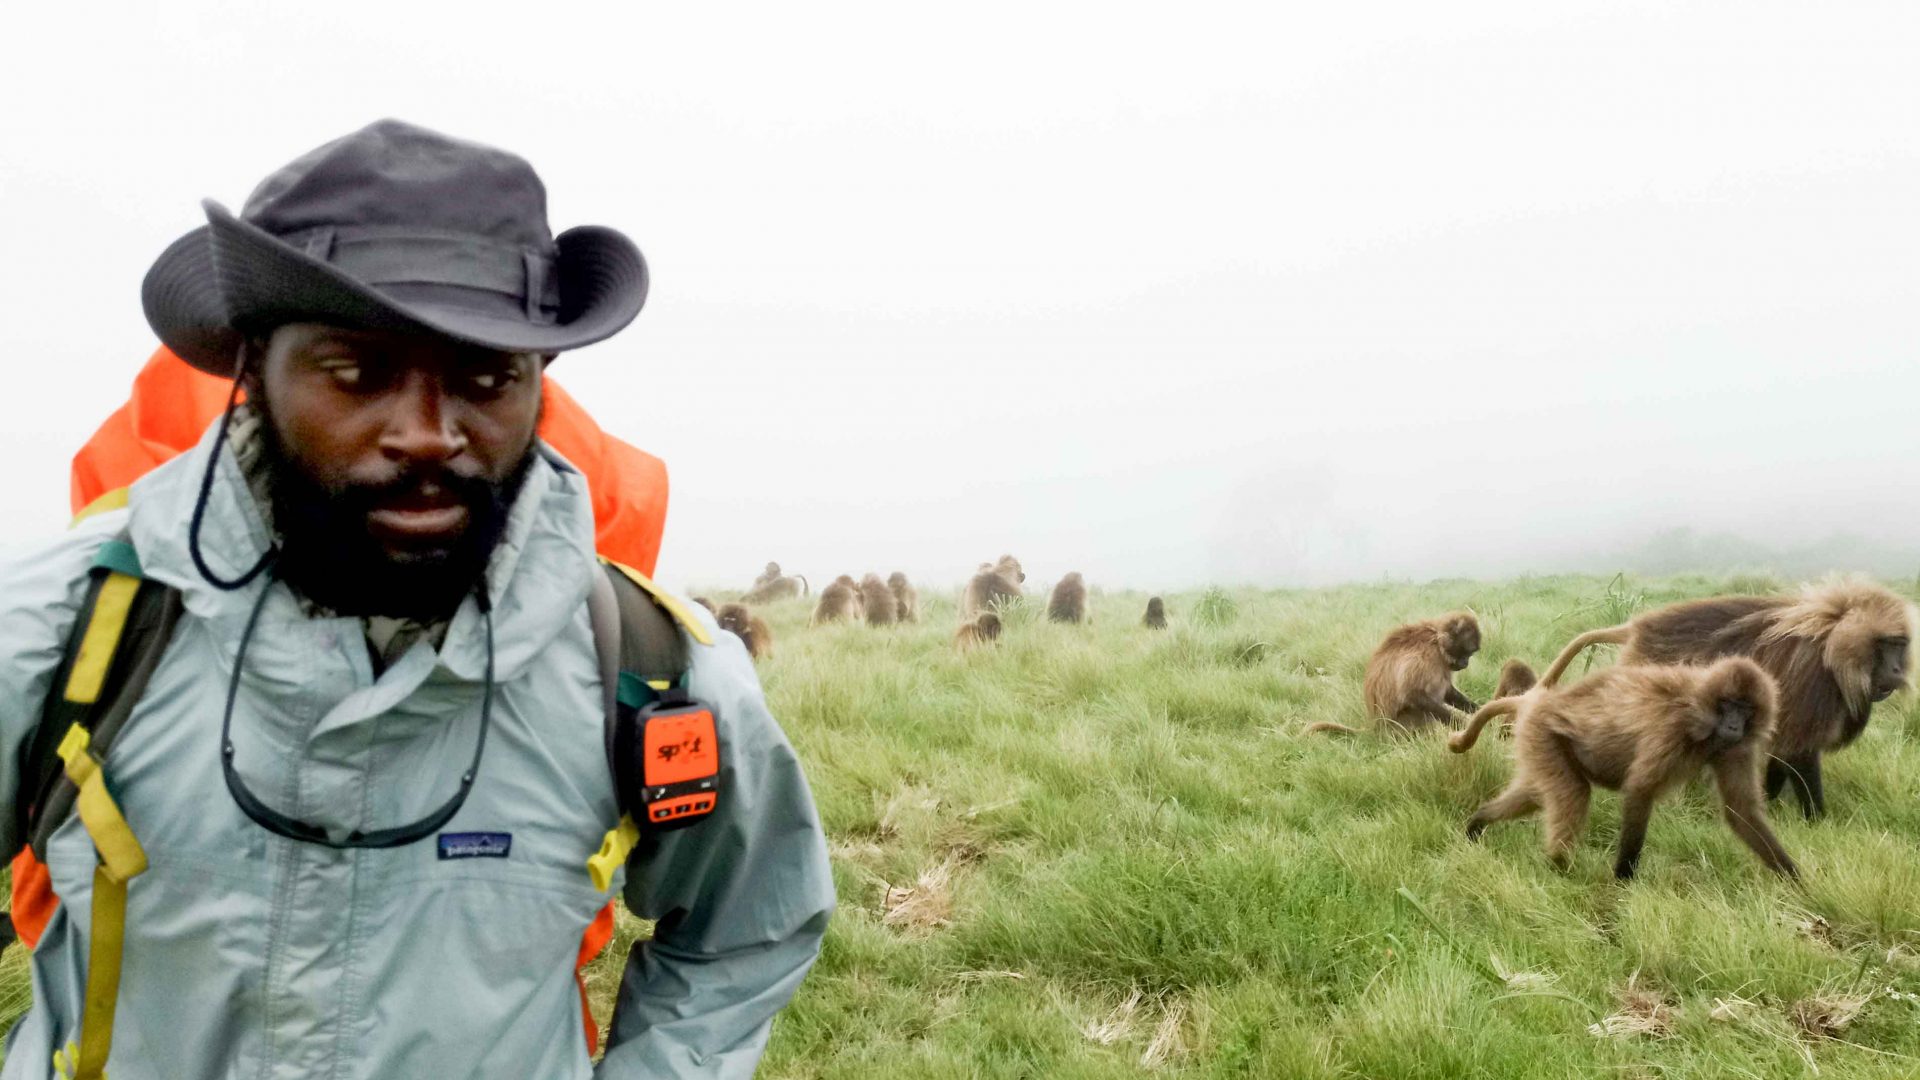 The man who walked 12,000 kilometers across the African continent